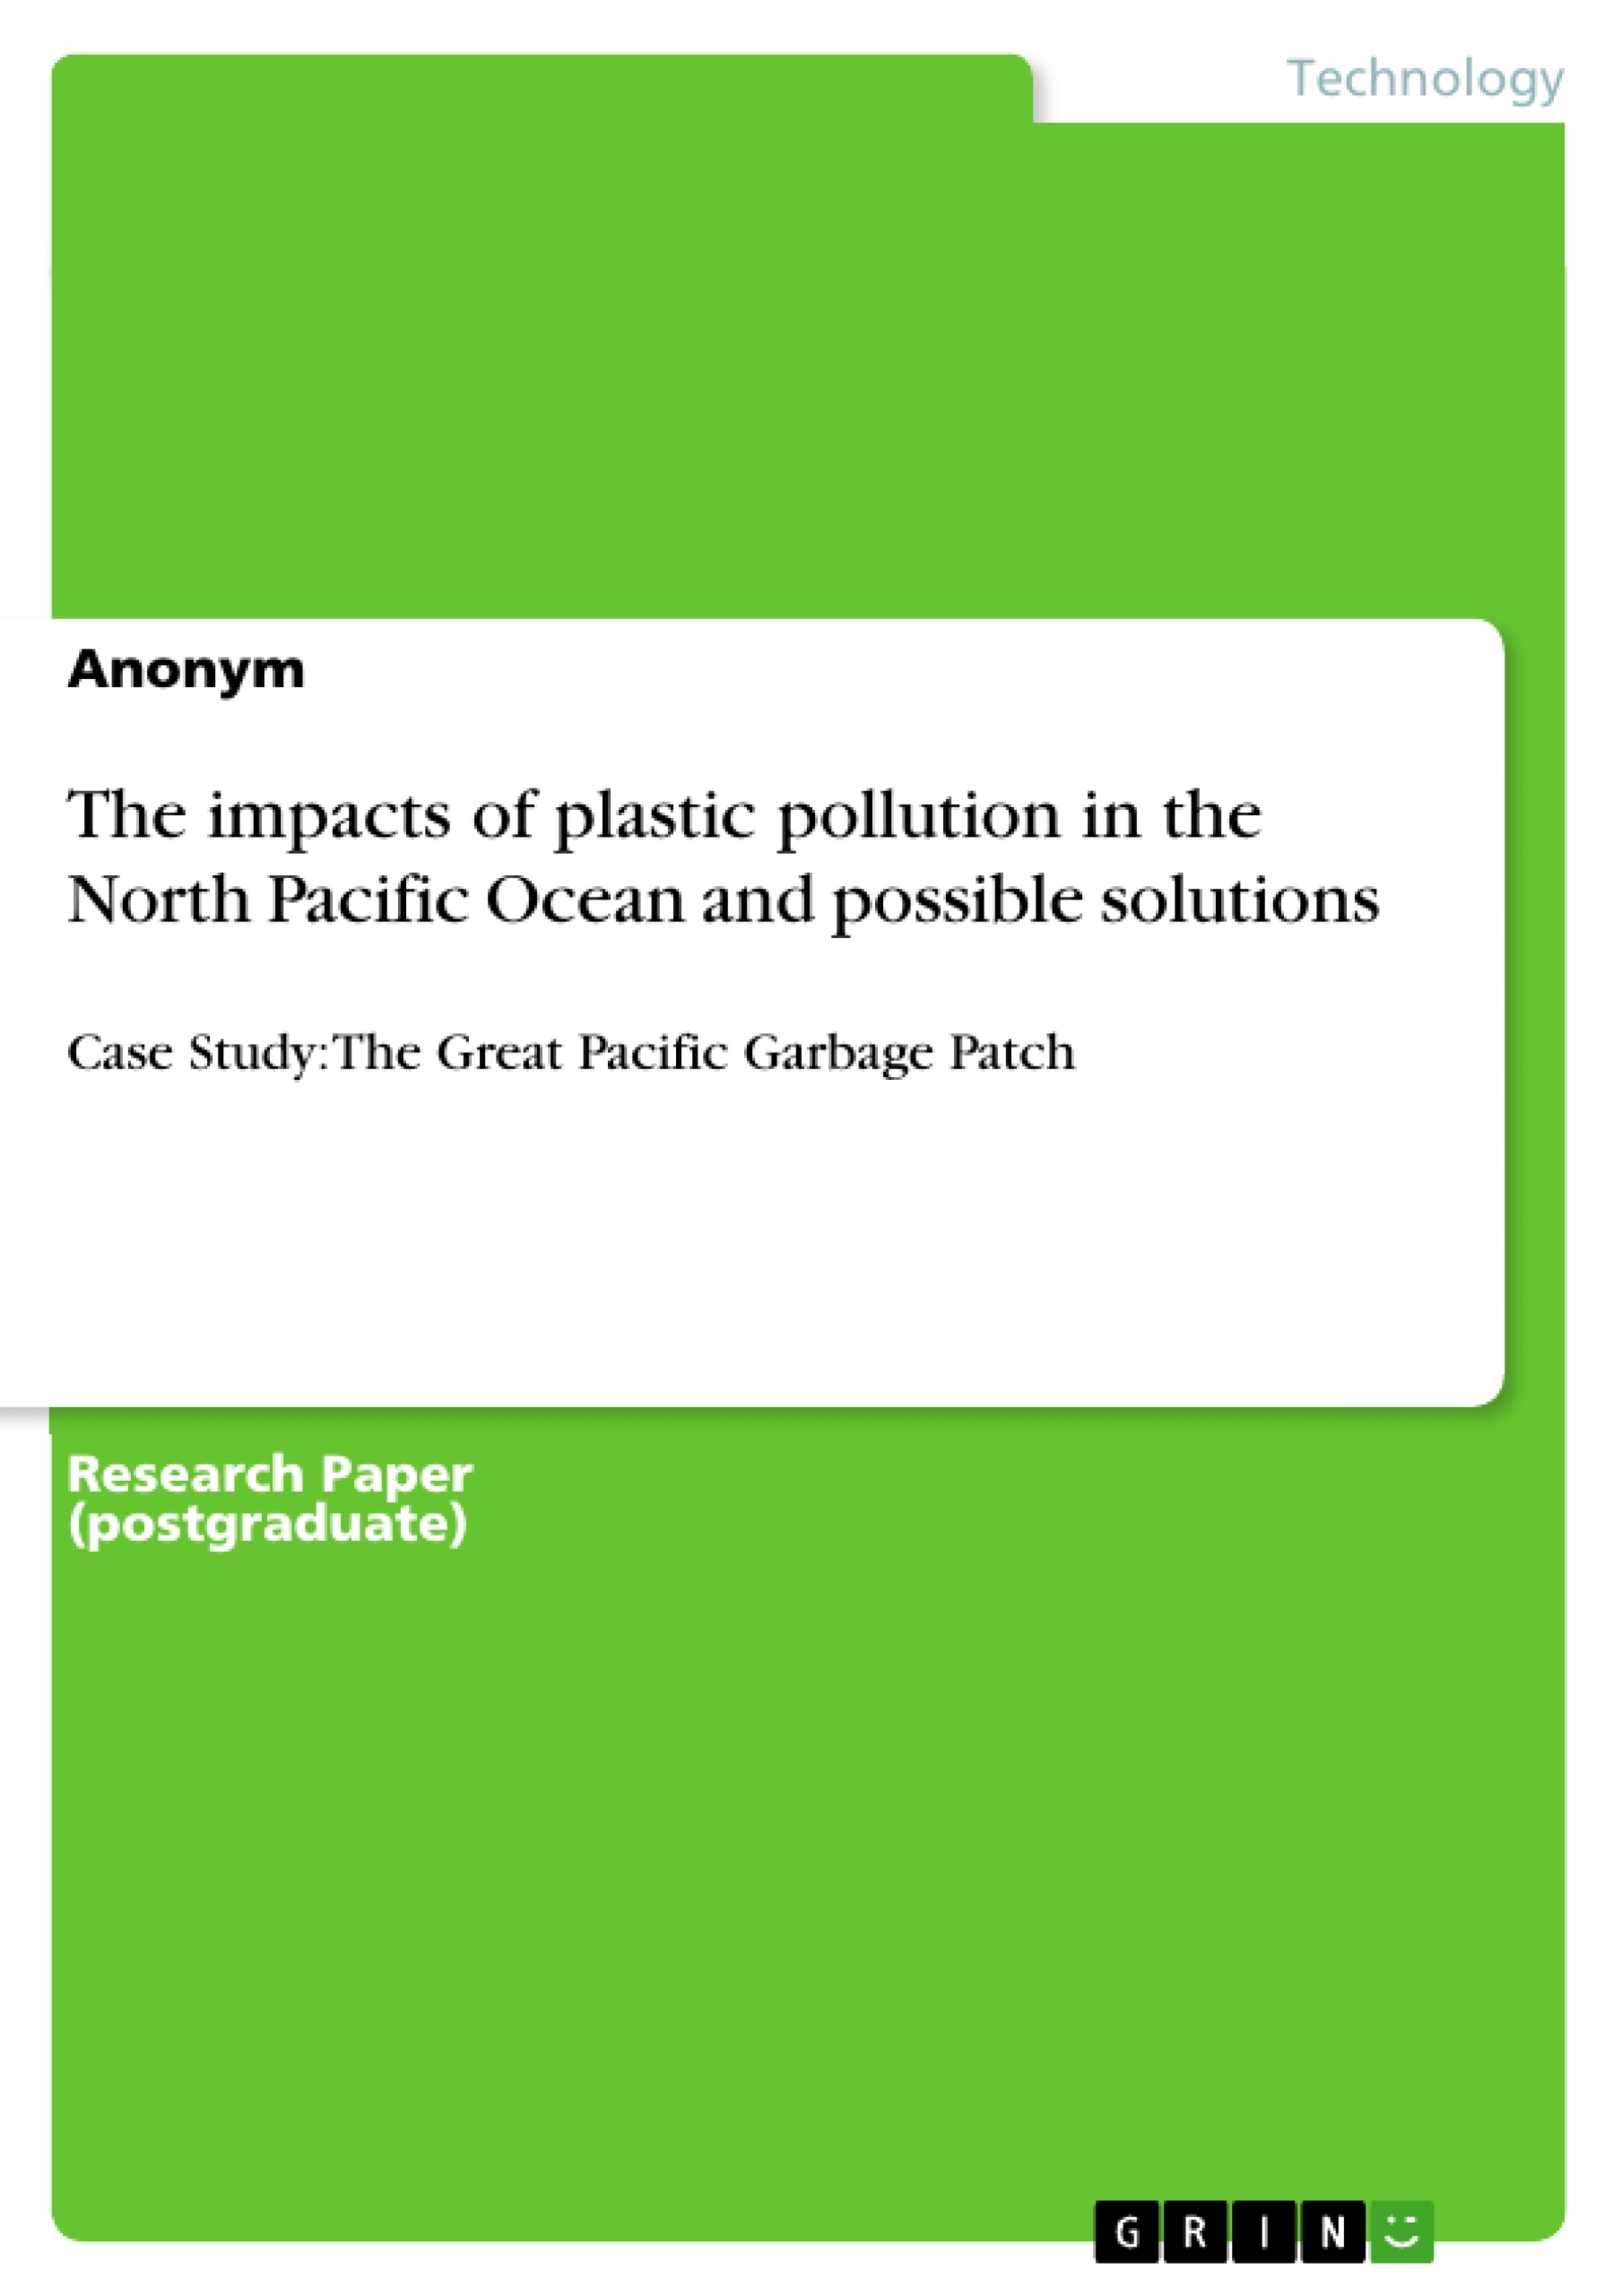 Title: The impacts of plastic pollution in the North Pacific Ocean and possible solutions